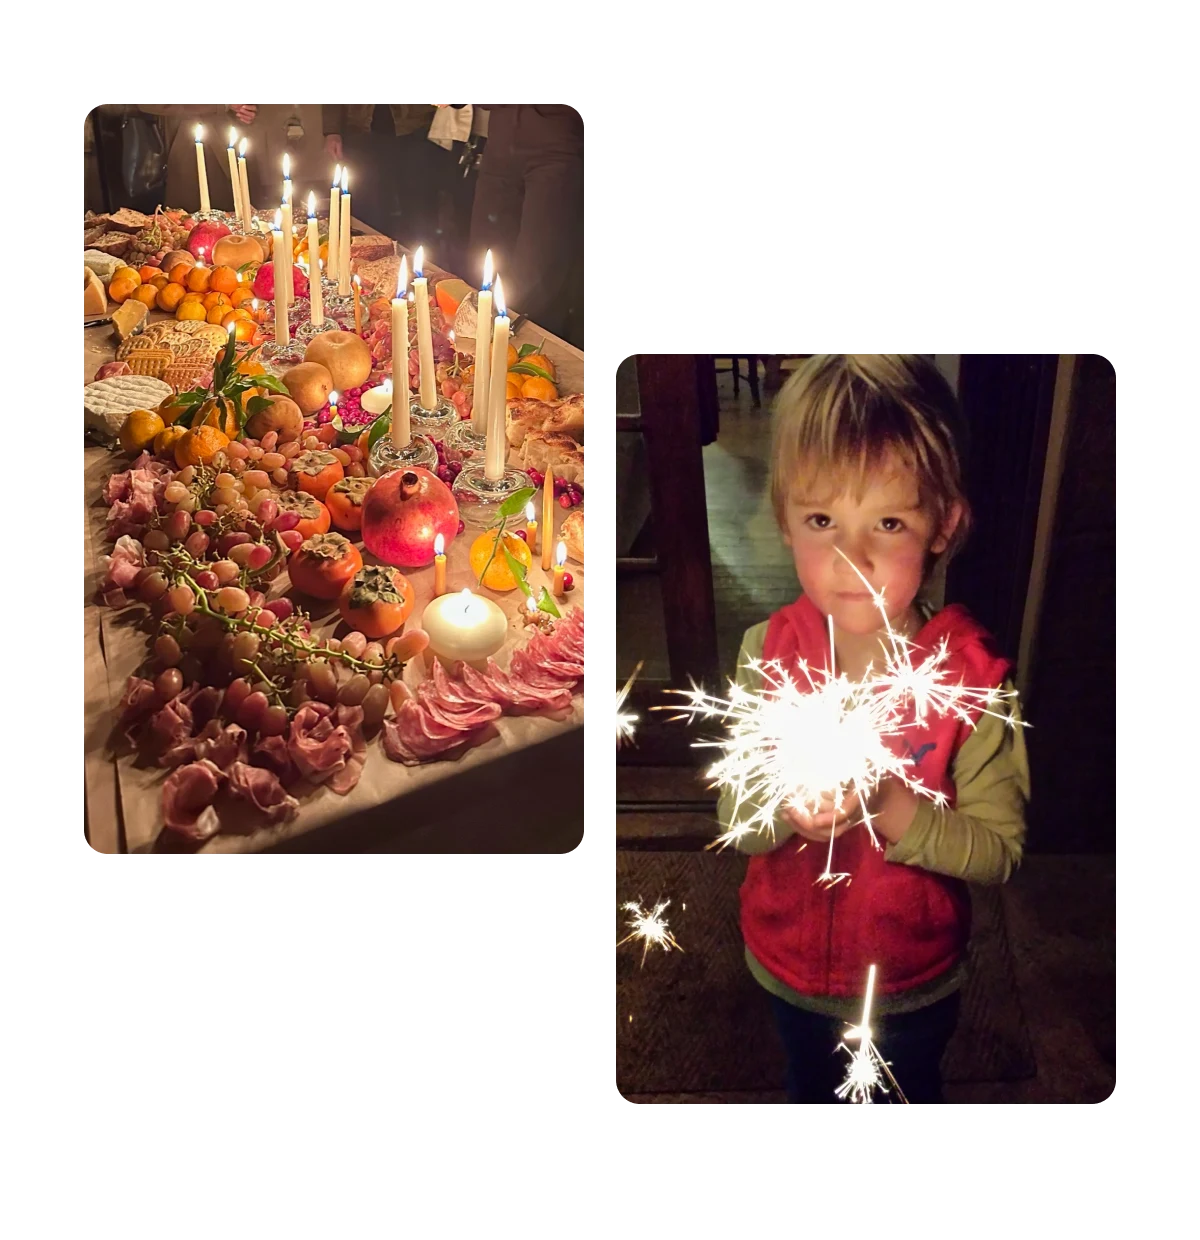 Two pins, table set with food for party, young boy holding sparklers